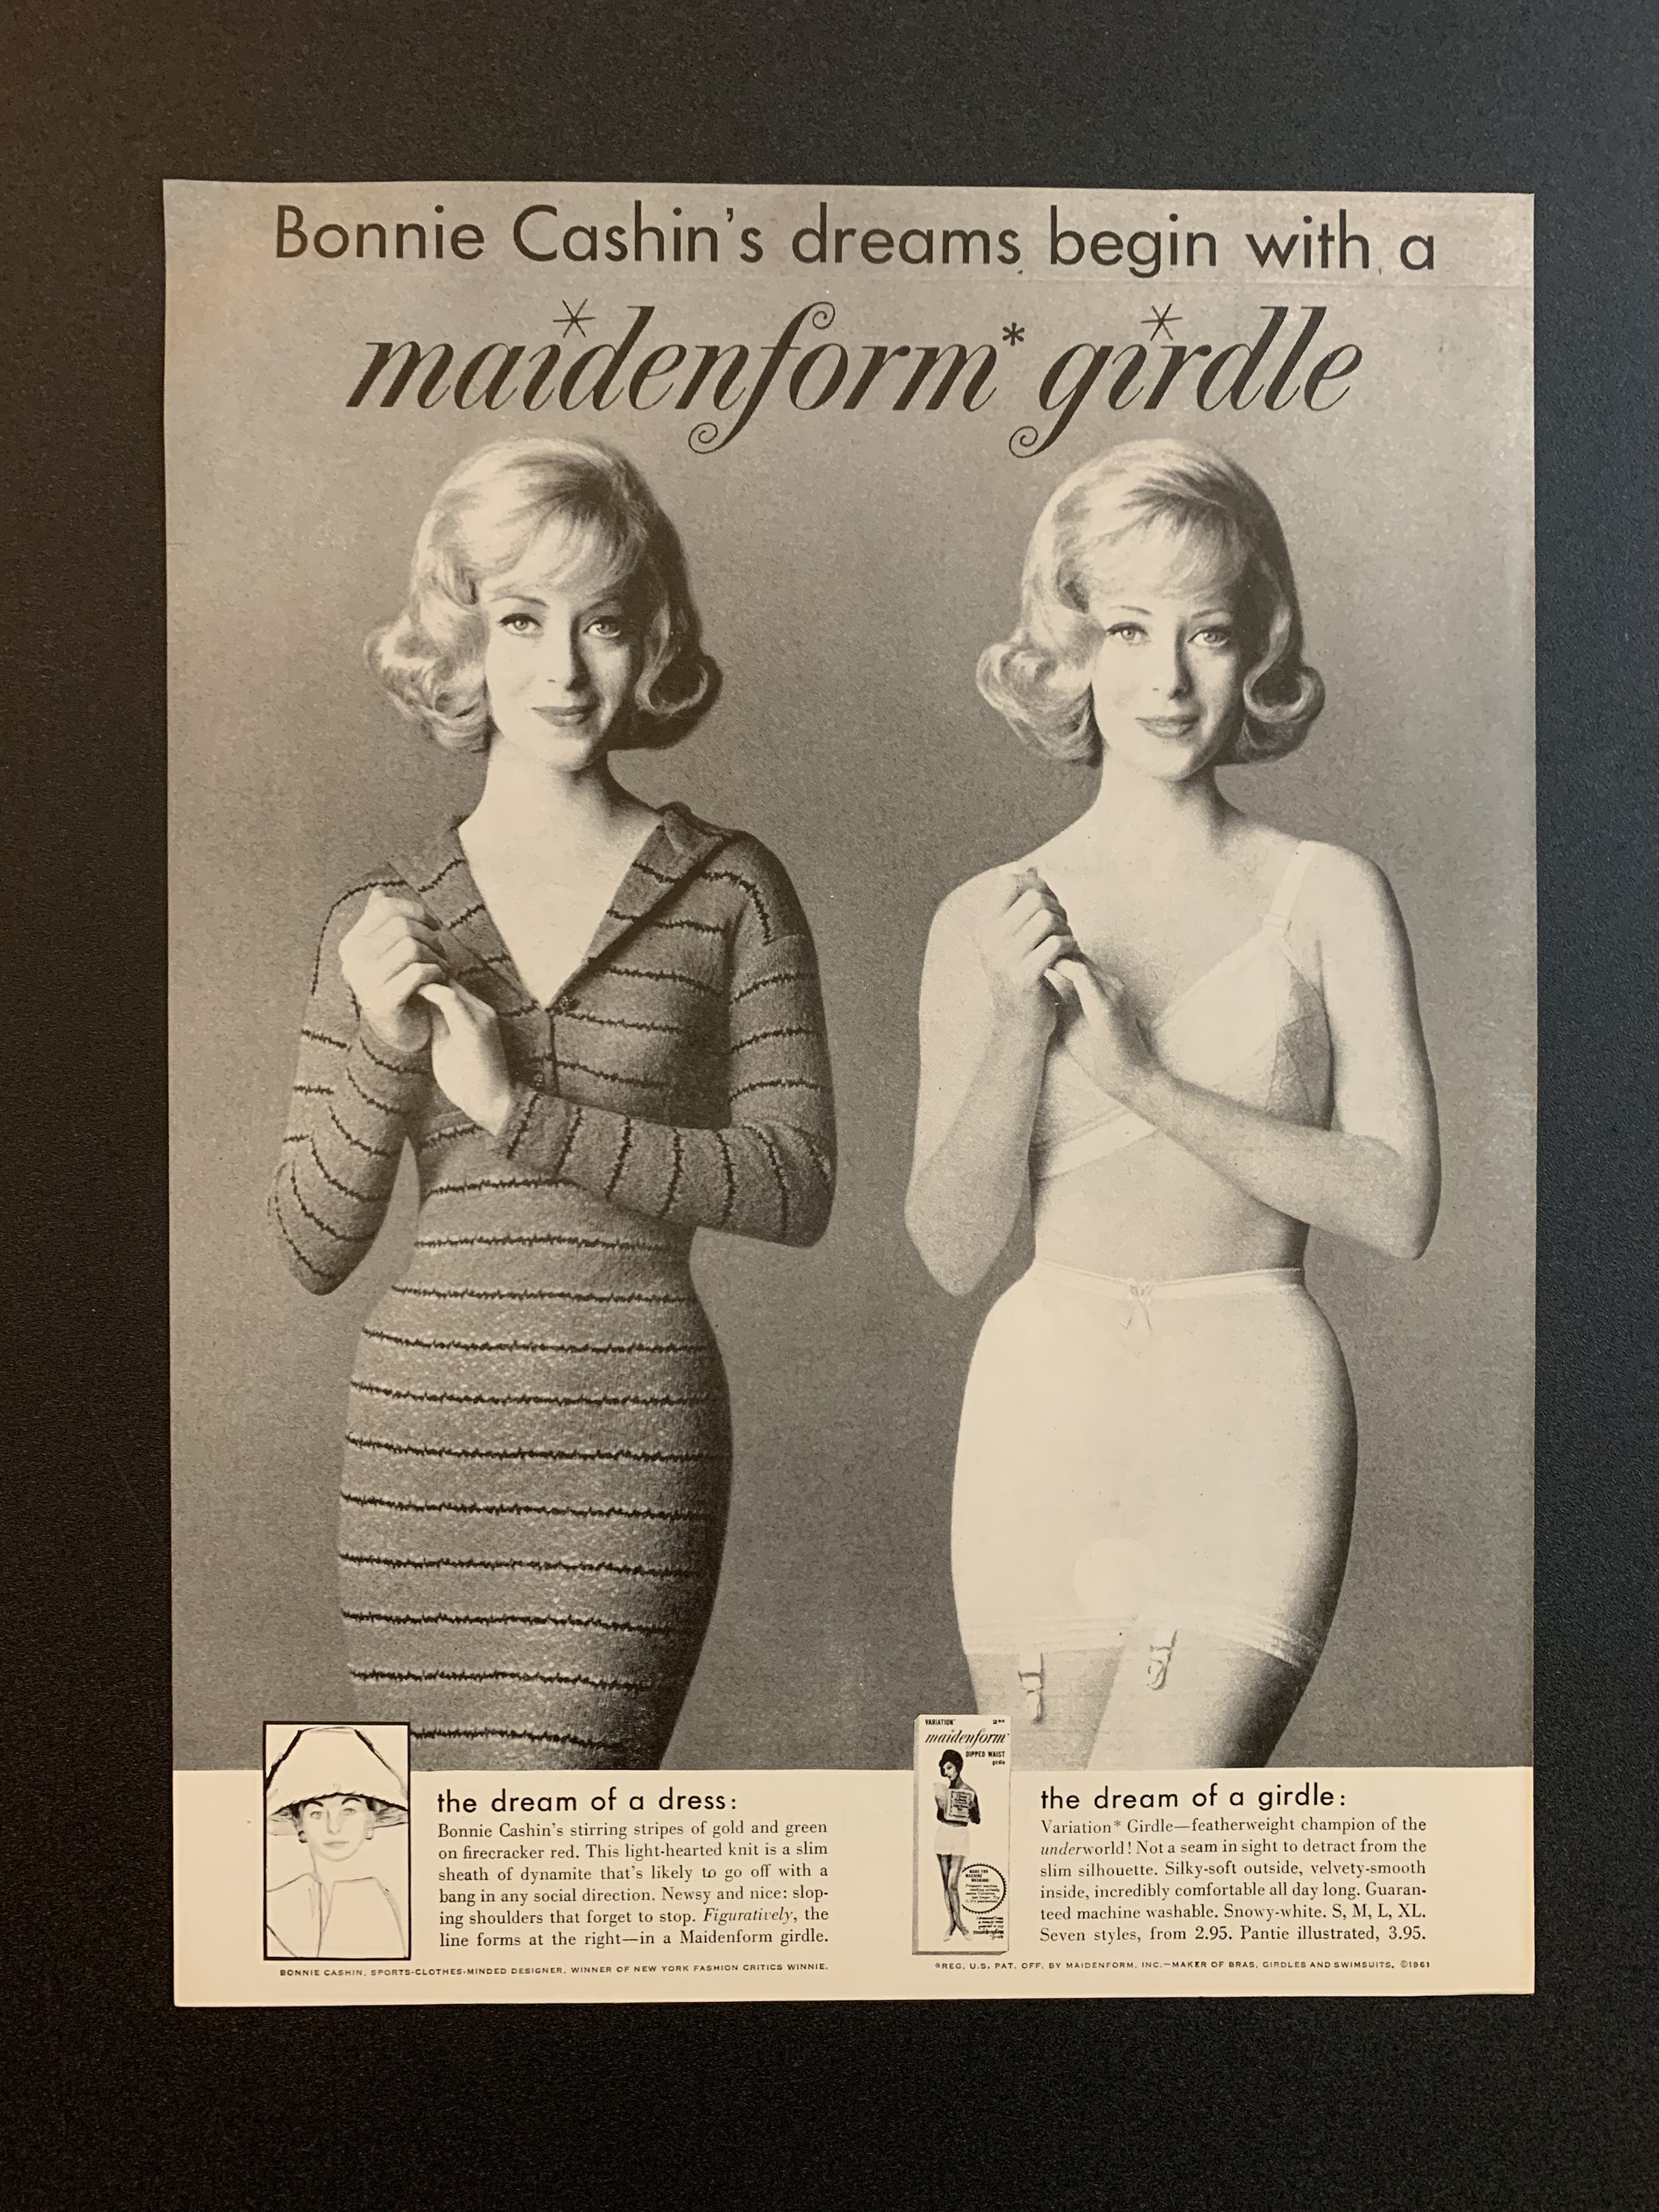 1963 women's Day Dreams bra and spandex by Maidenform brunette ad